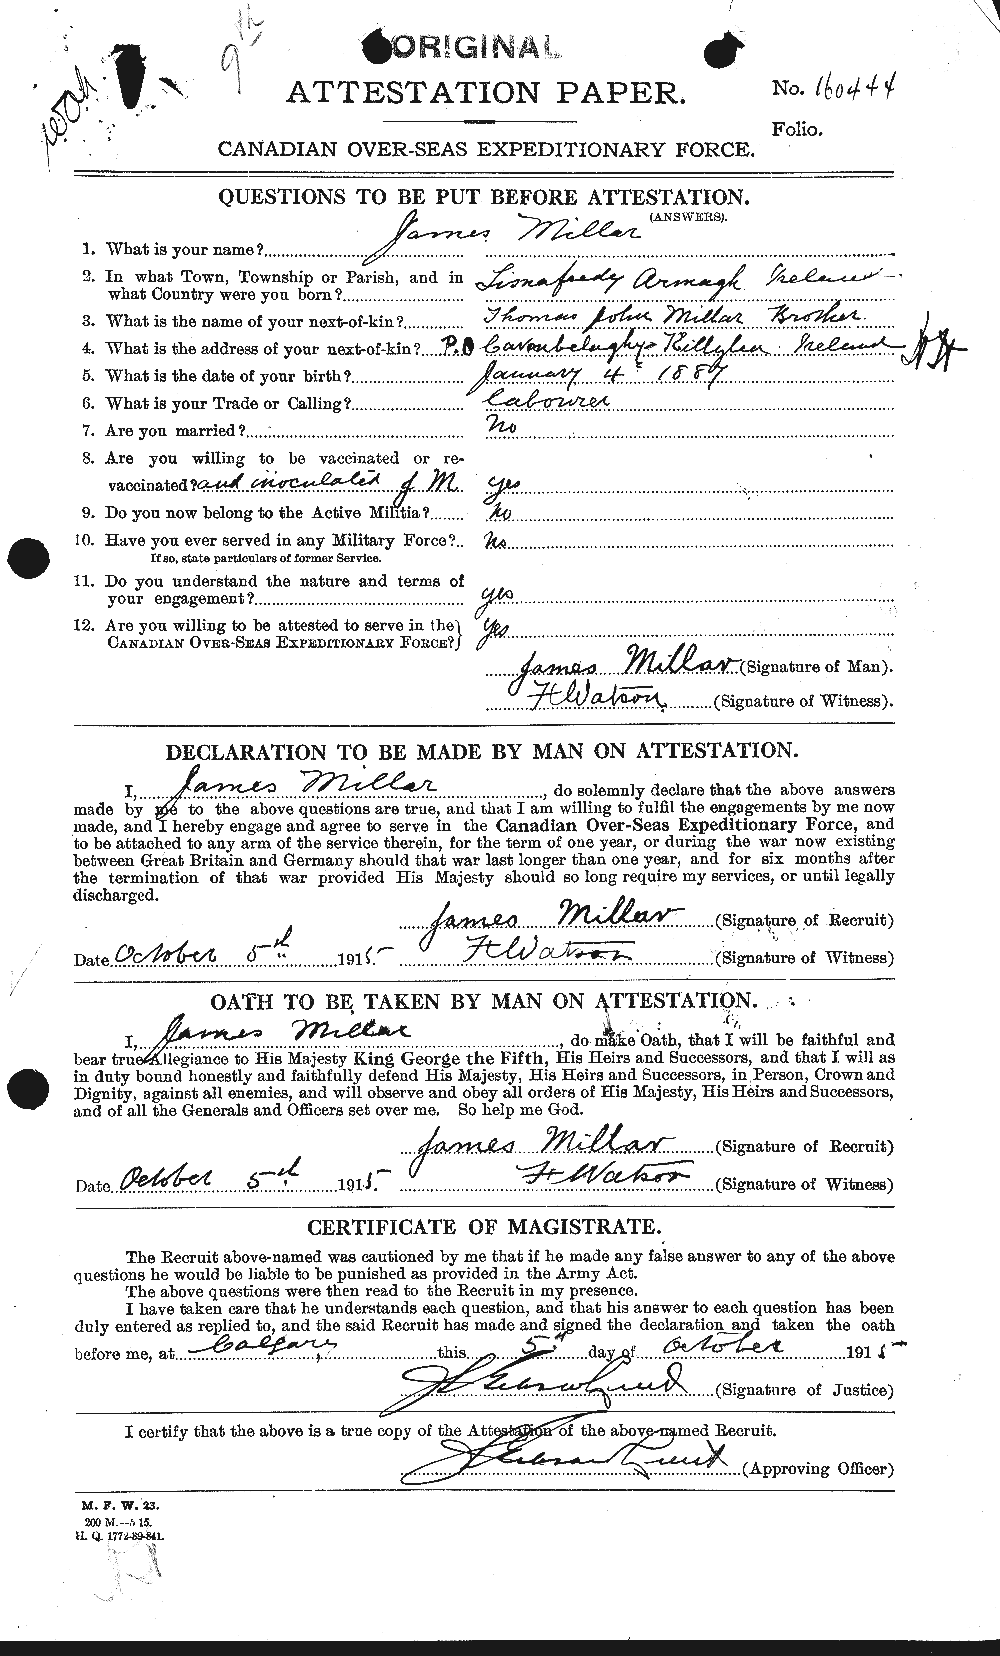 Personnel Records of the First World War - CEF 495293a